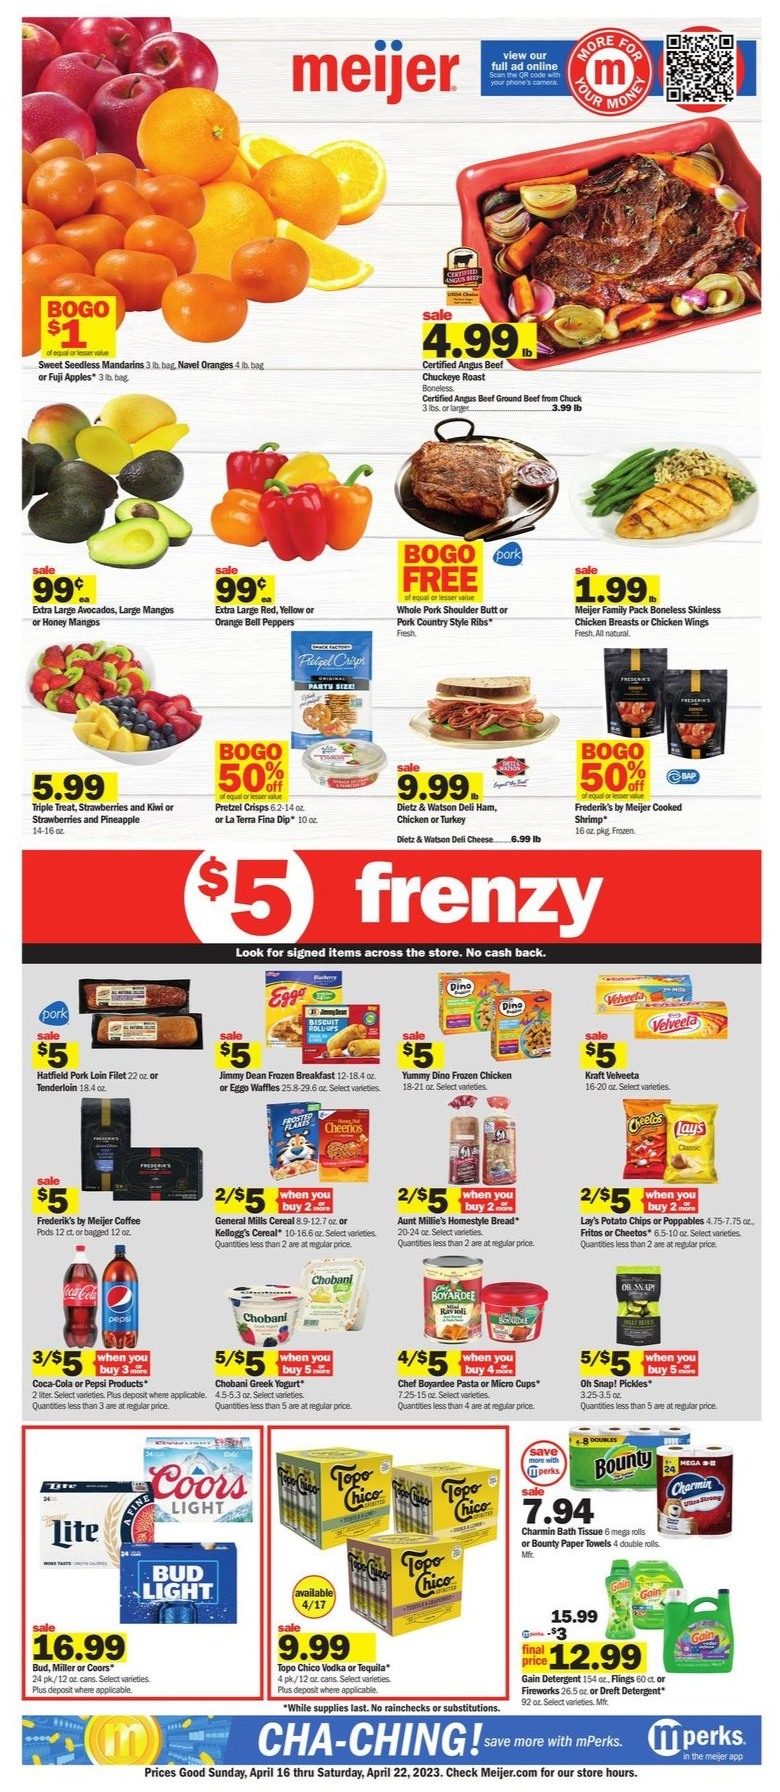 Meijer Weekly Ad 14th – 20th April 2023 Page 1